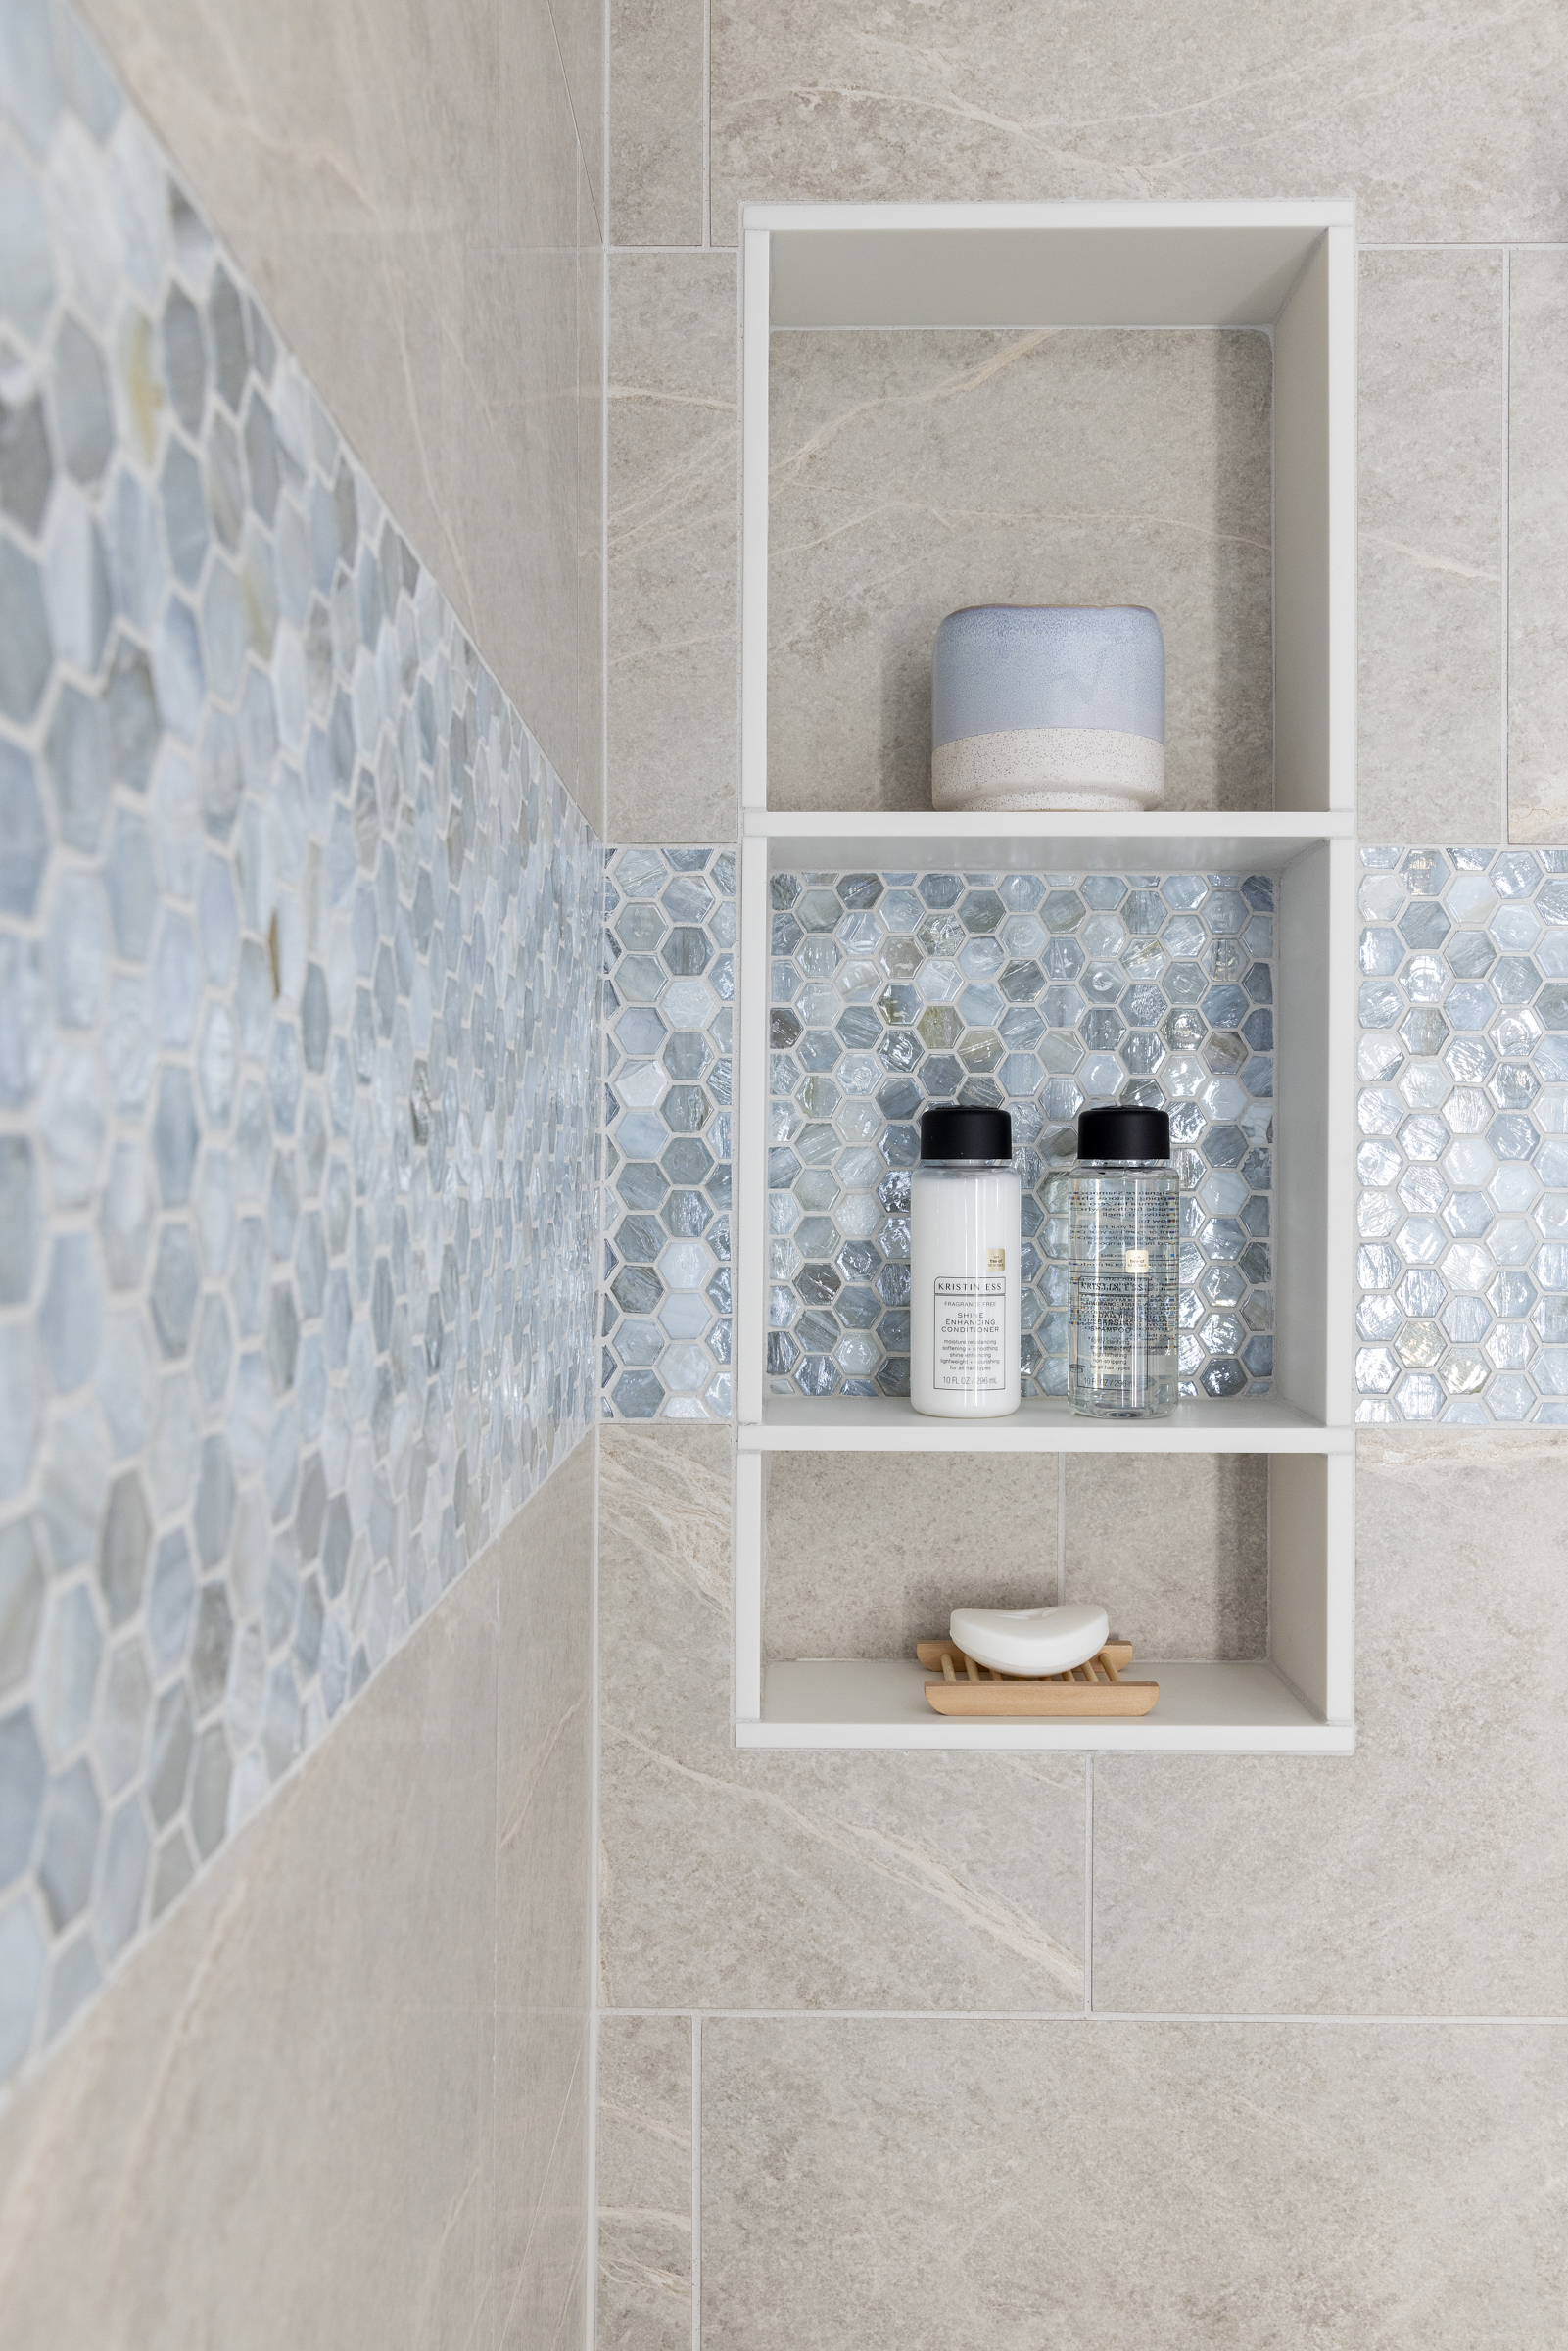 Primary bathroom remodel with shower with tan tile and blue accent tile around shower and built in shelves for shampoo and soap